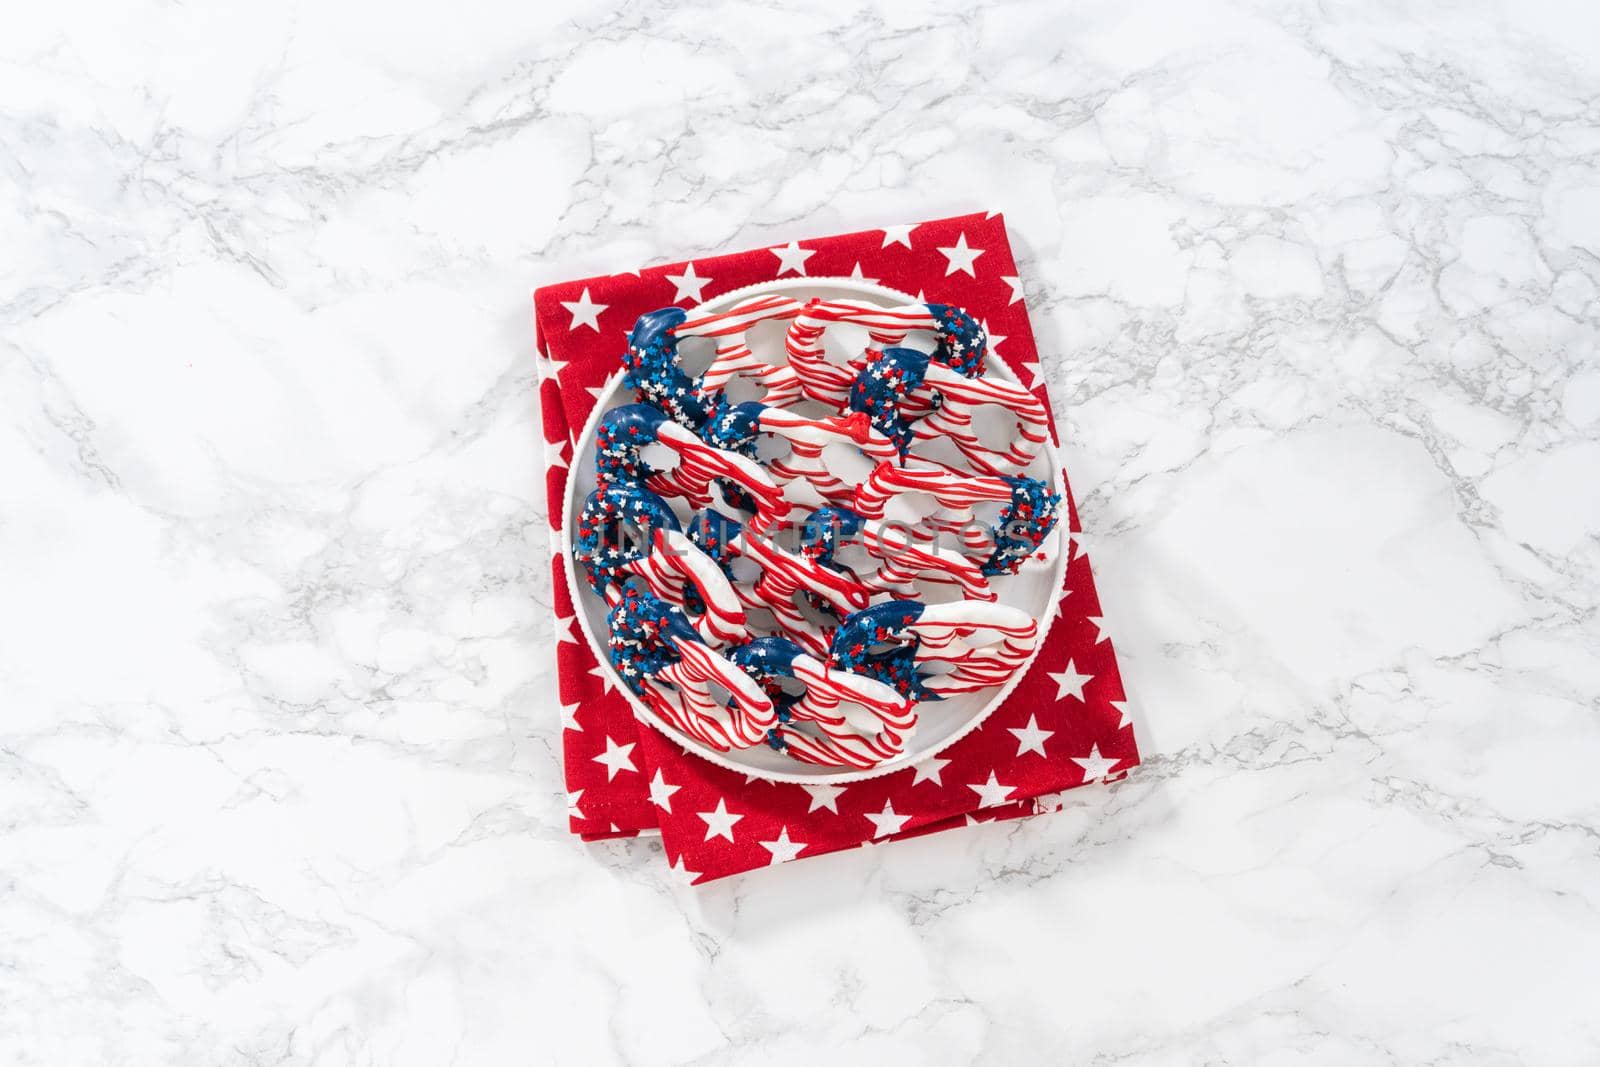 Red White and Blue Chocolate Covered Pretzel Twists by arinahabich